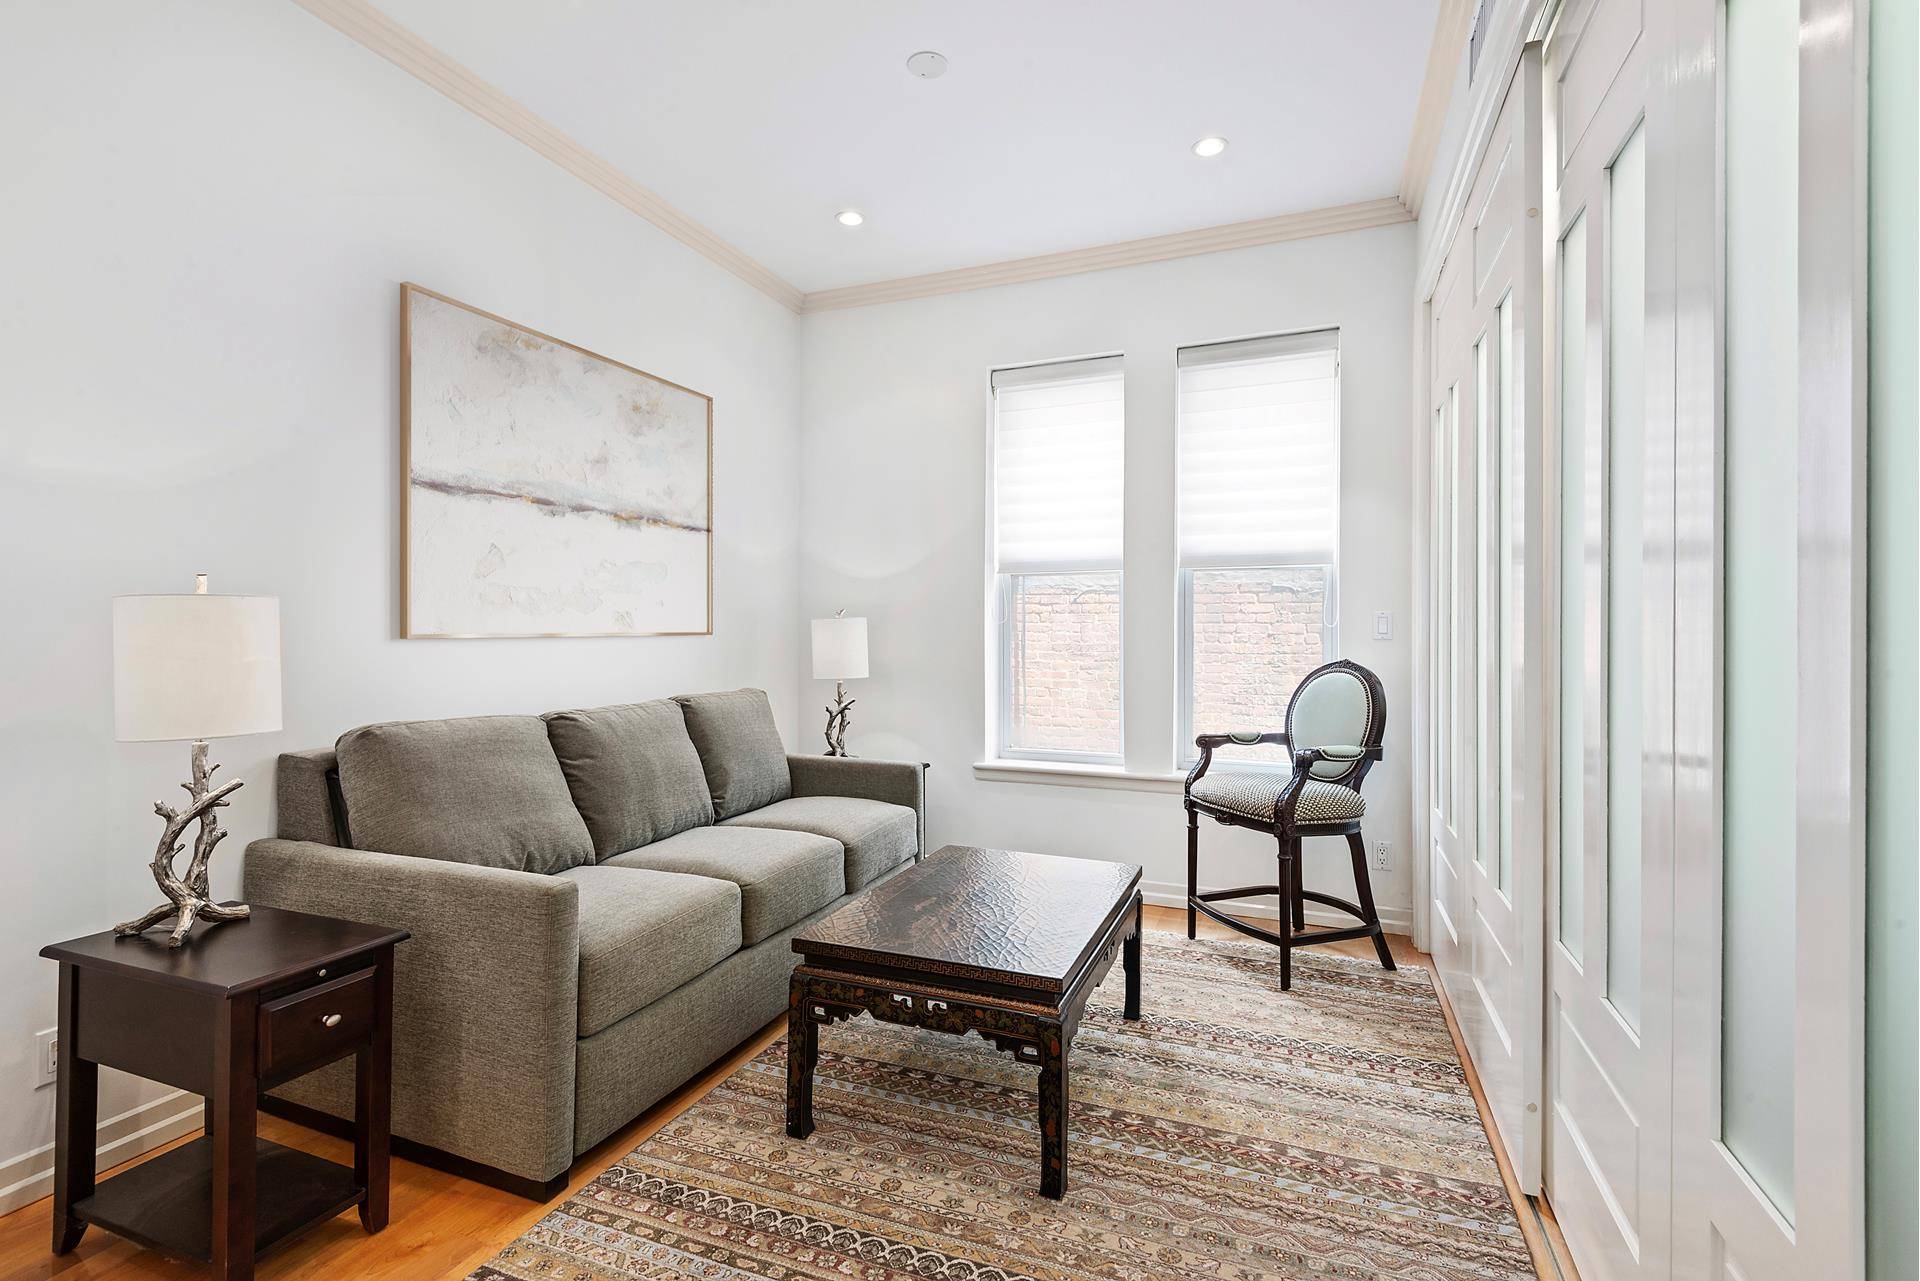 Beautifully renovated 2 Bedroom, 1 Bathroom gem located in the heart of the Upper West Side.